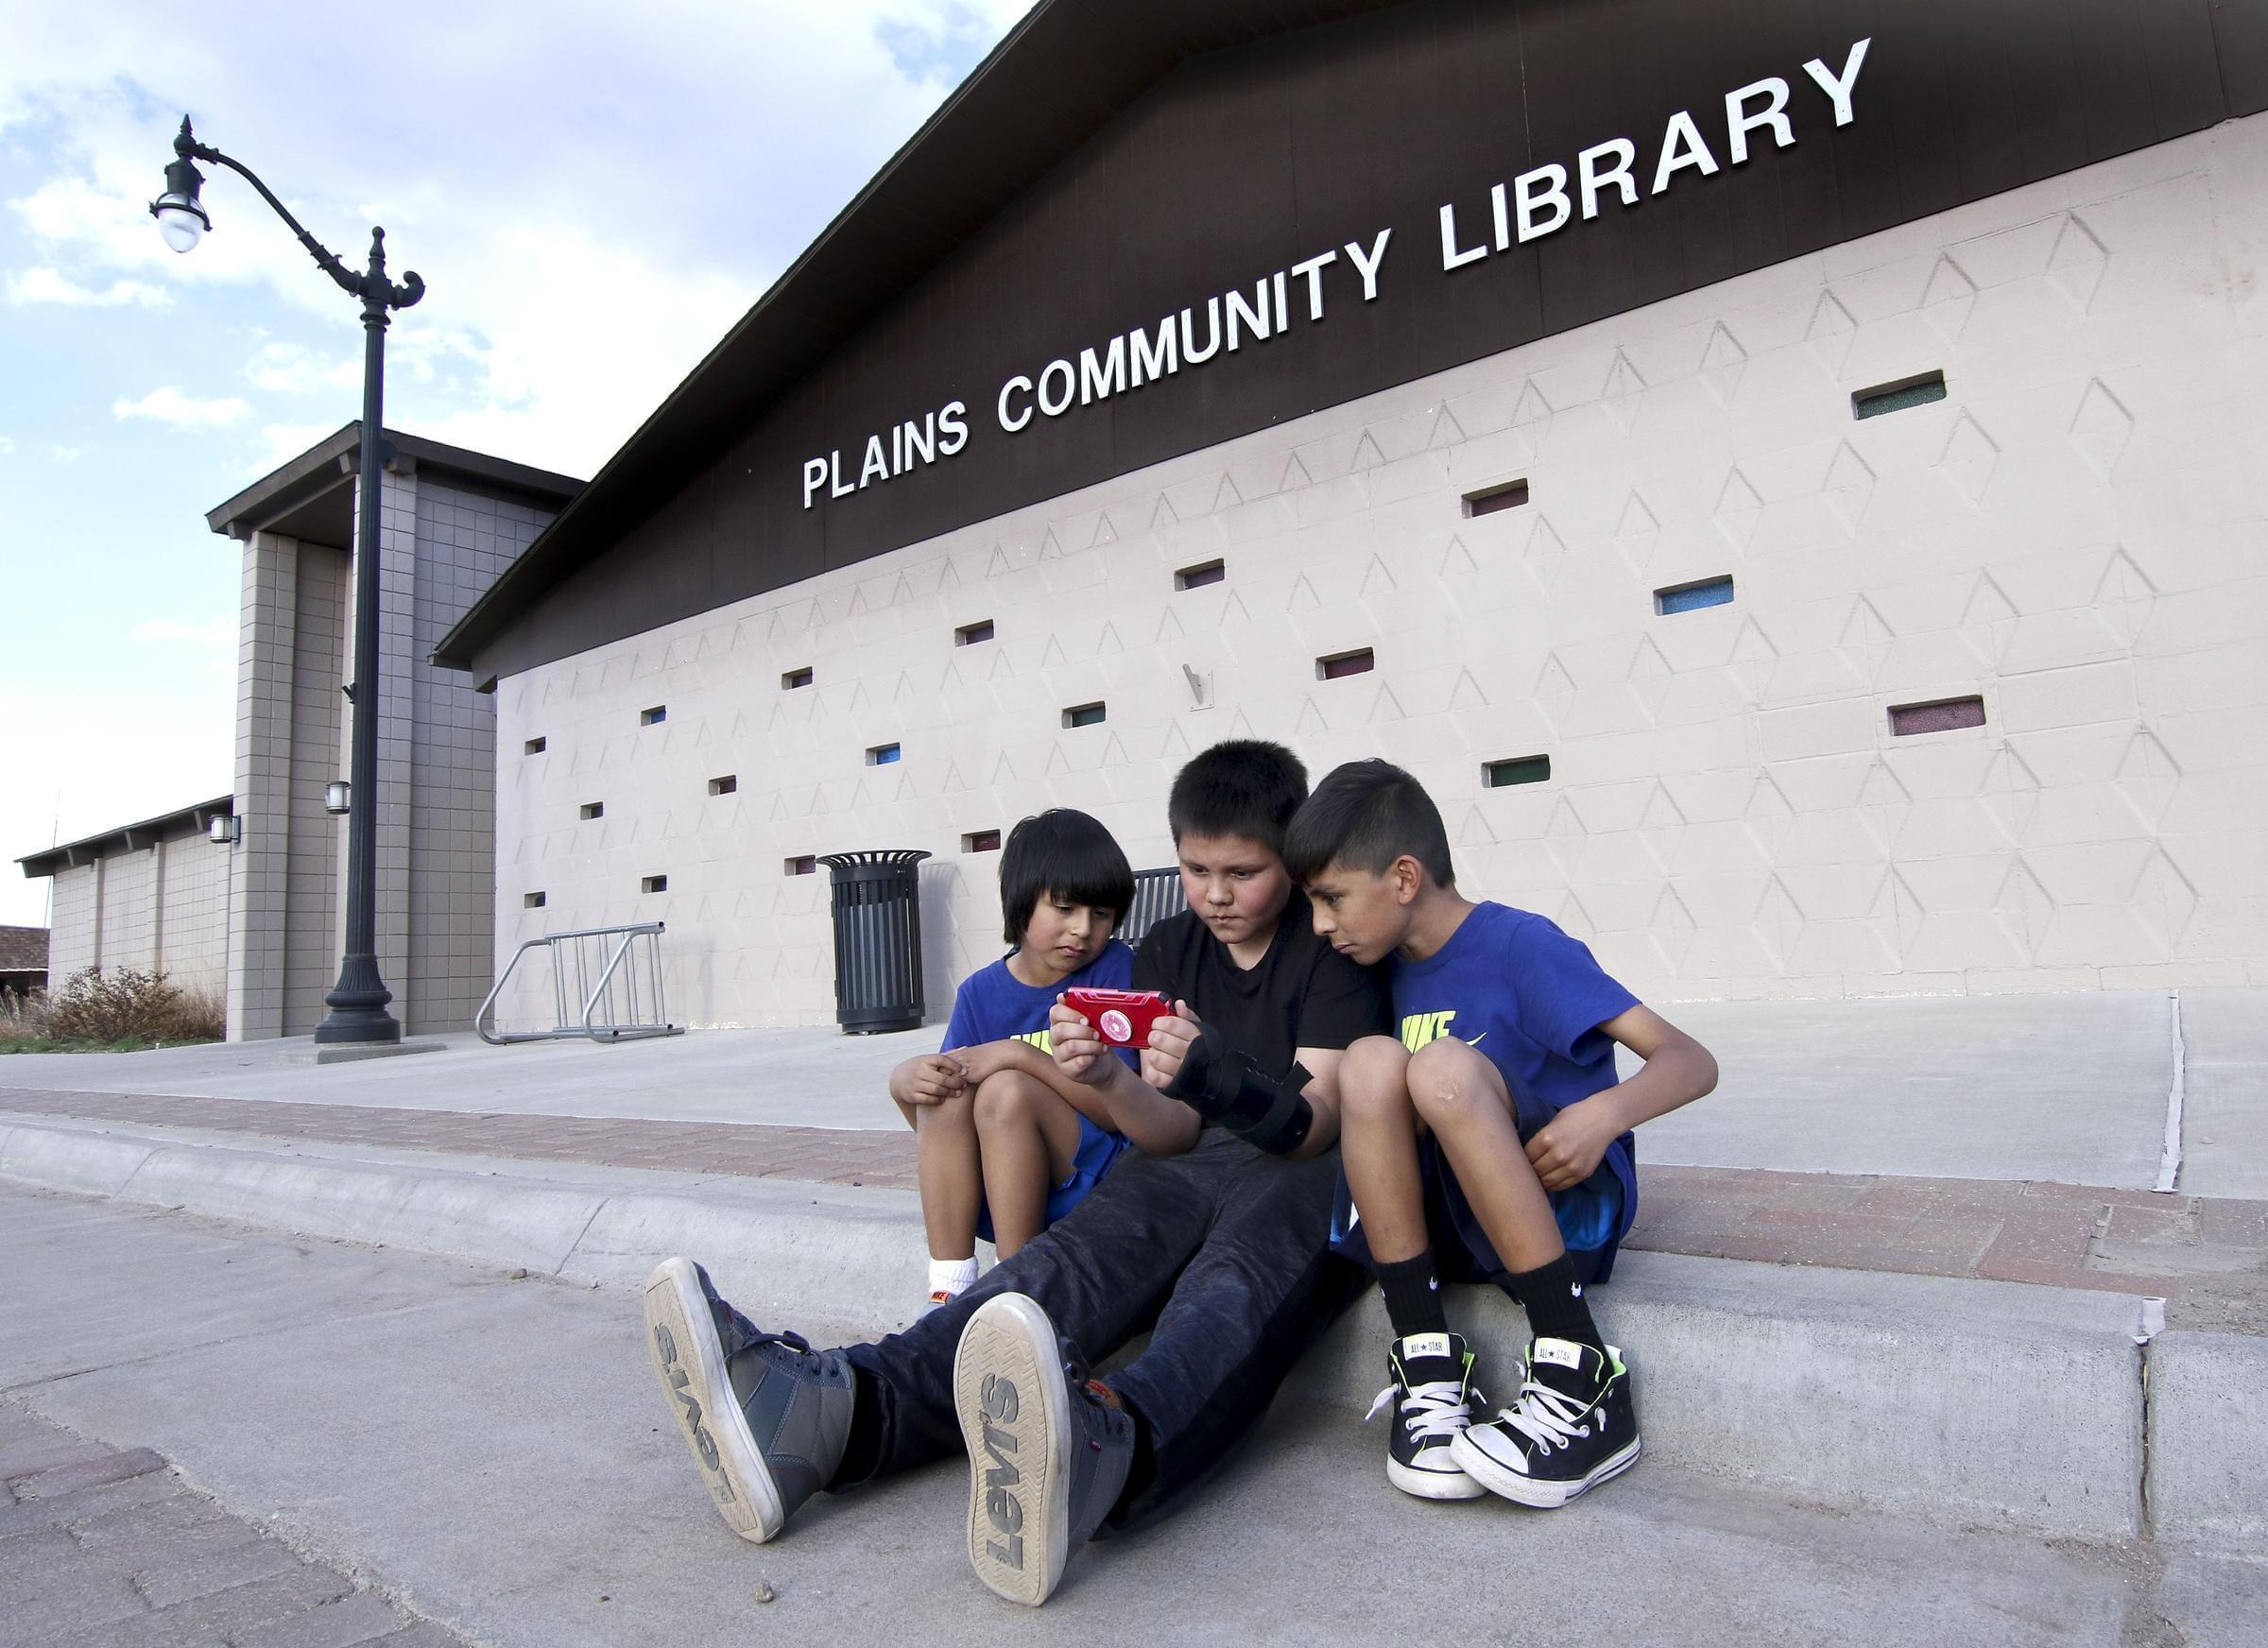 Angel Alvarez, center, holds his phone as he and Eduardo and Giovanni Alvarez watch Youtube videos. They're camped outside the library in Plains, Kansas, using the Wi-Fi signal because broadband can be hard to come by in town.